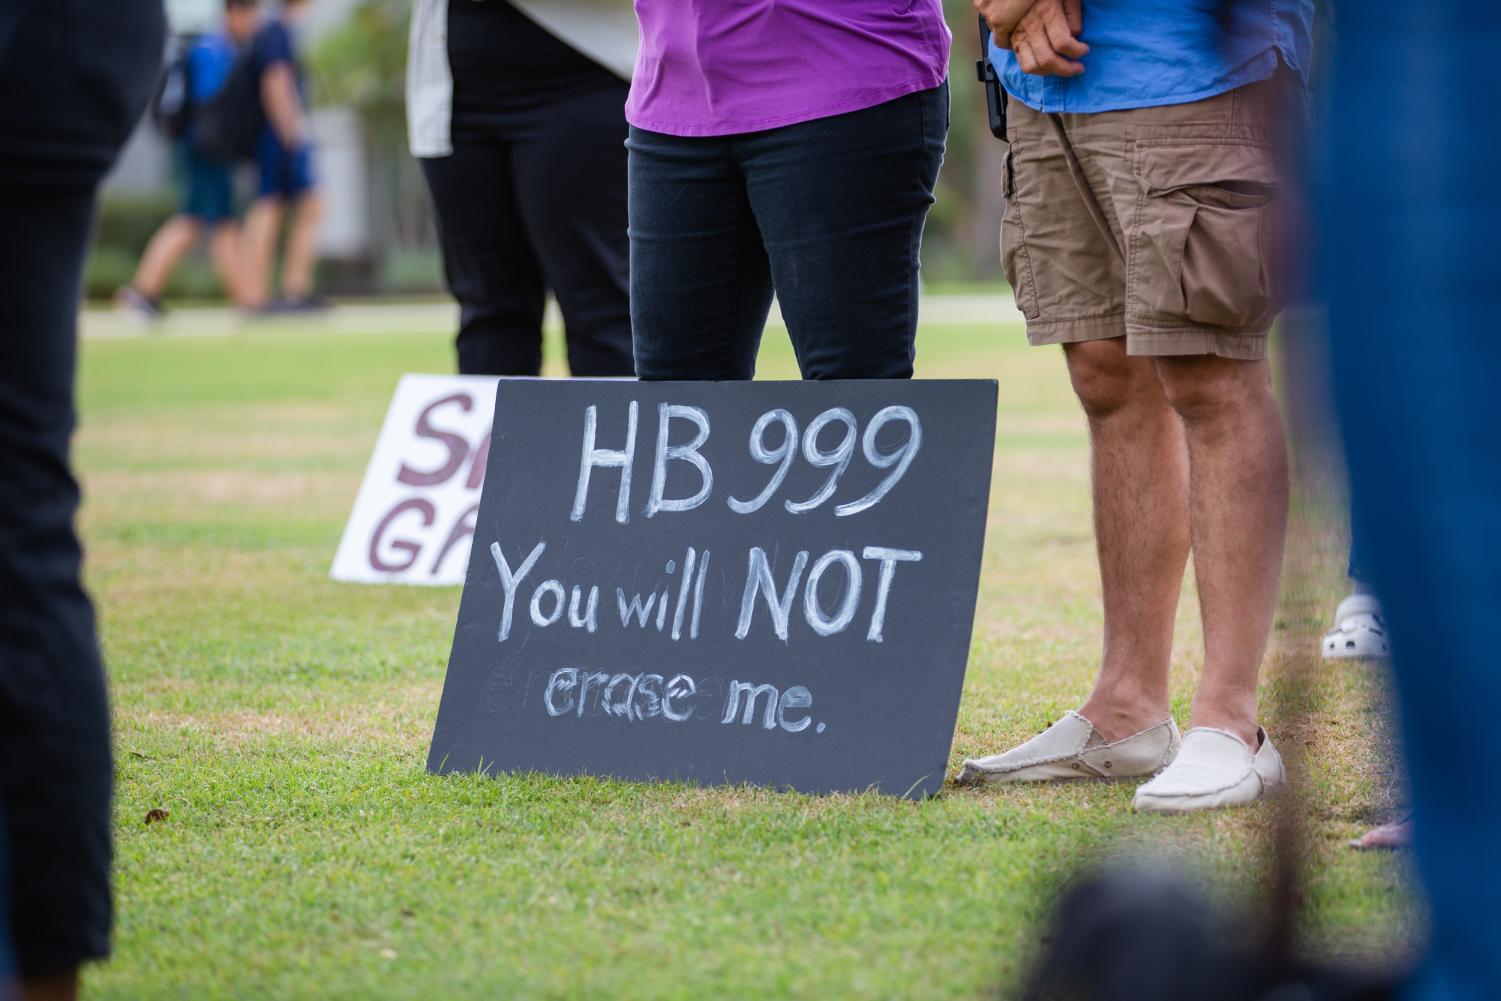 Florida House Bill 999 What It is, What It Isn’t, and Its Potential